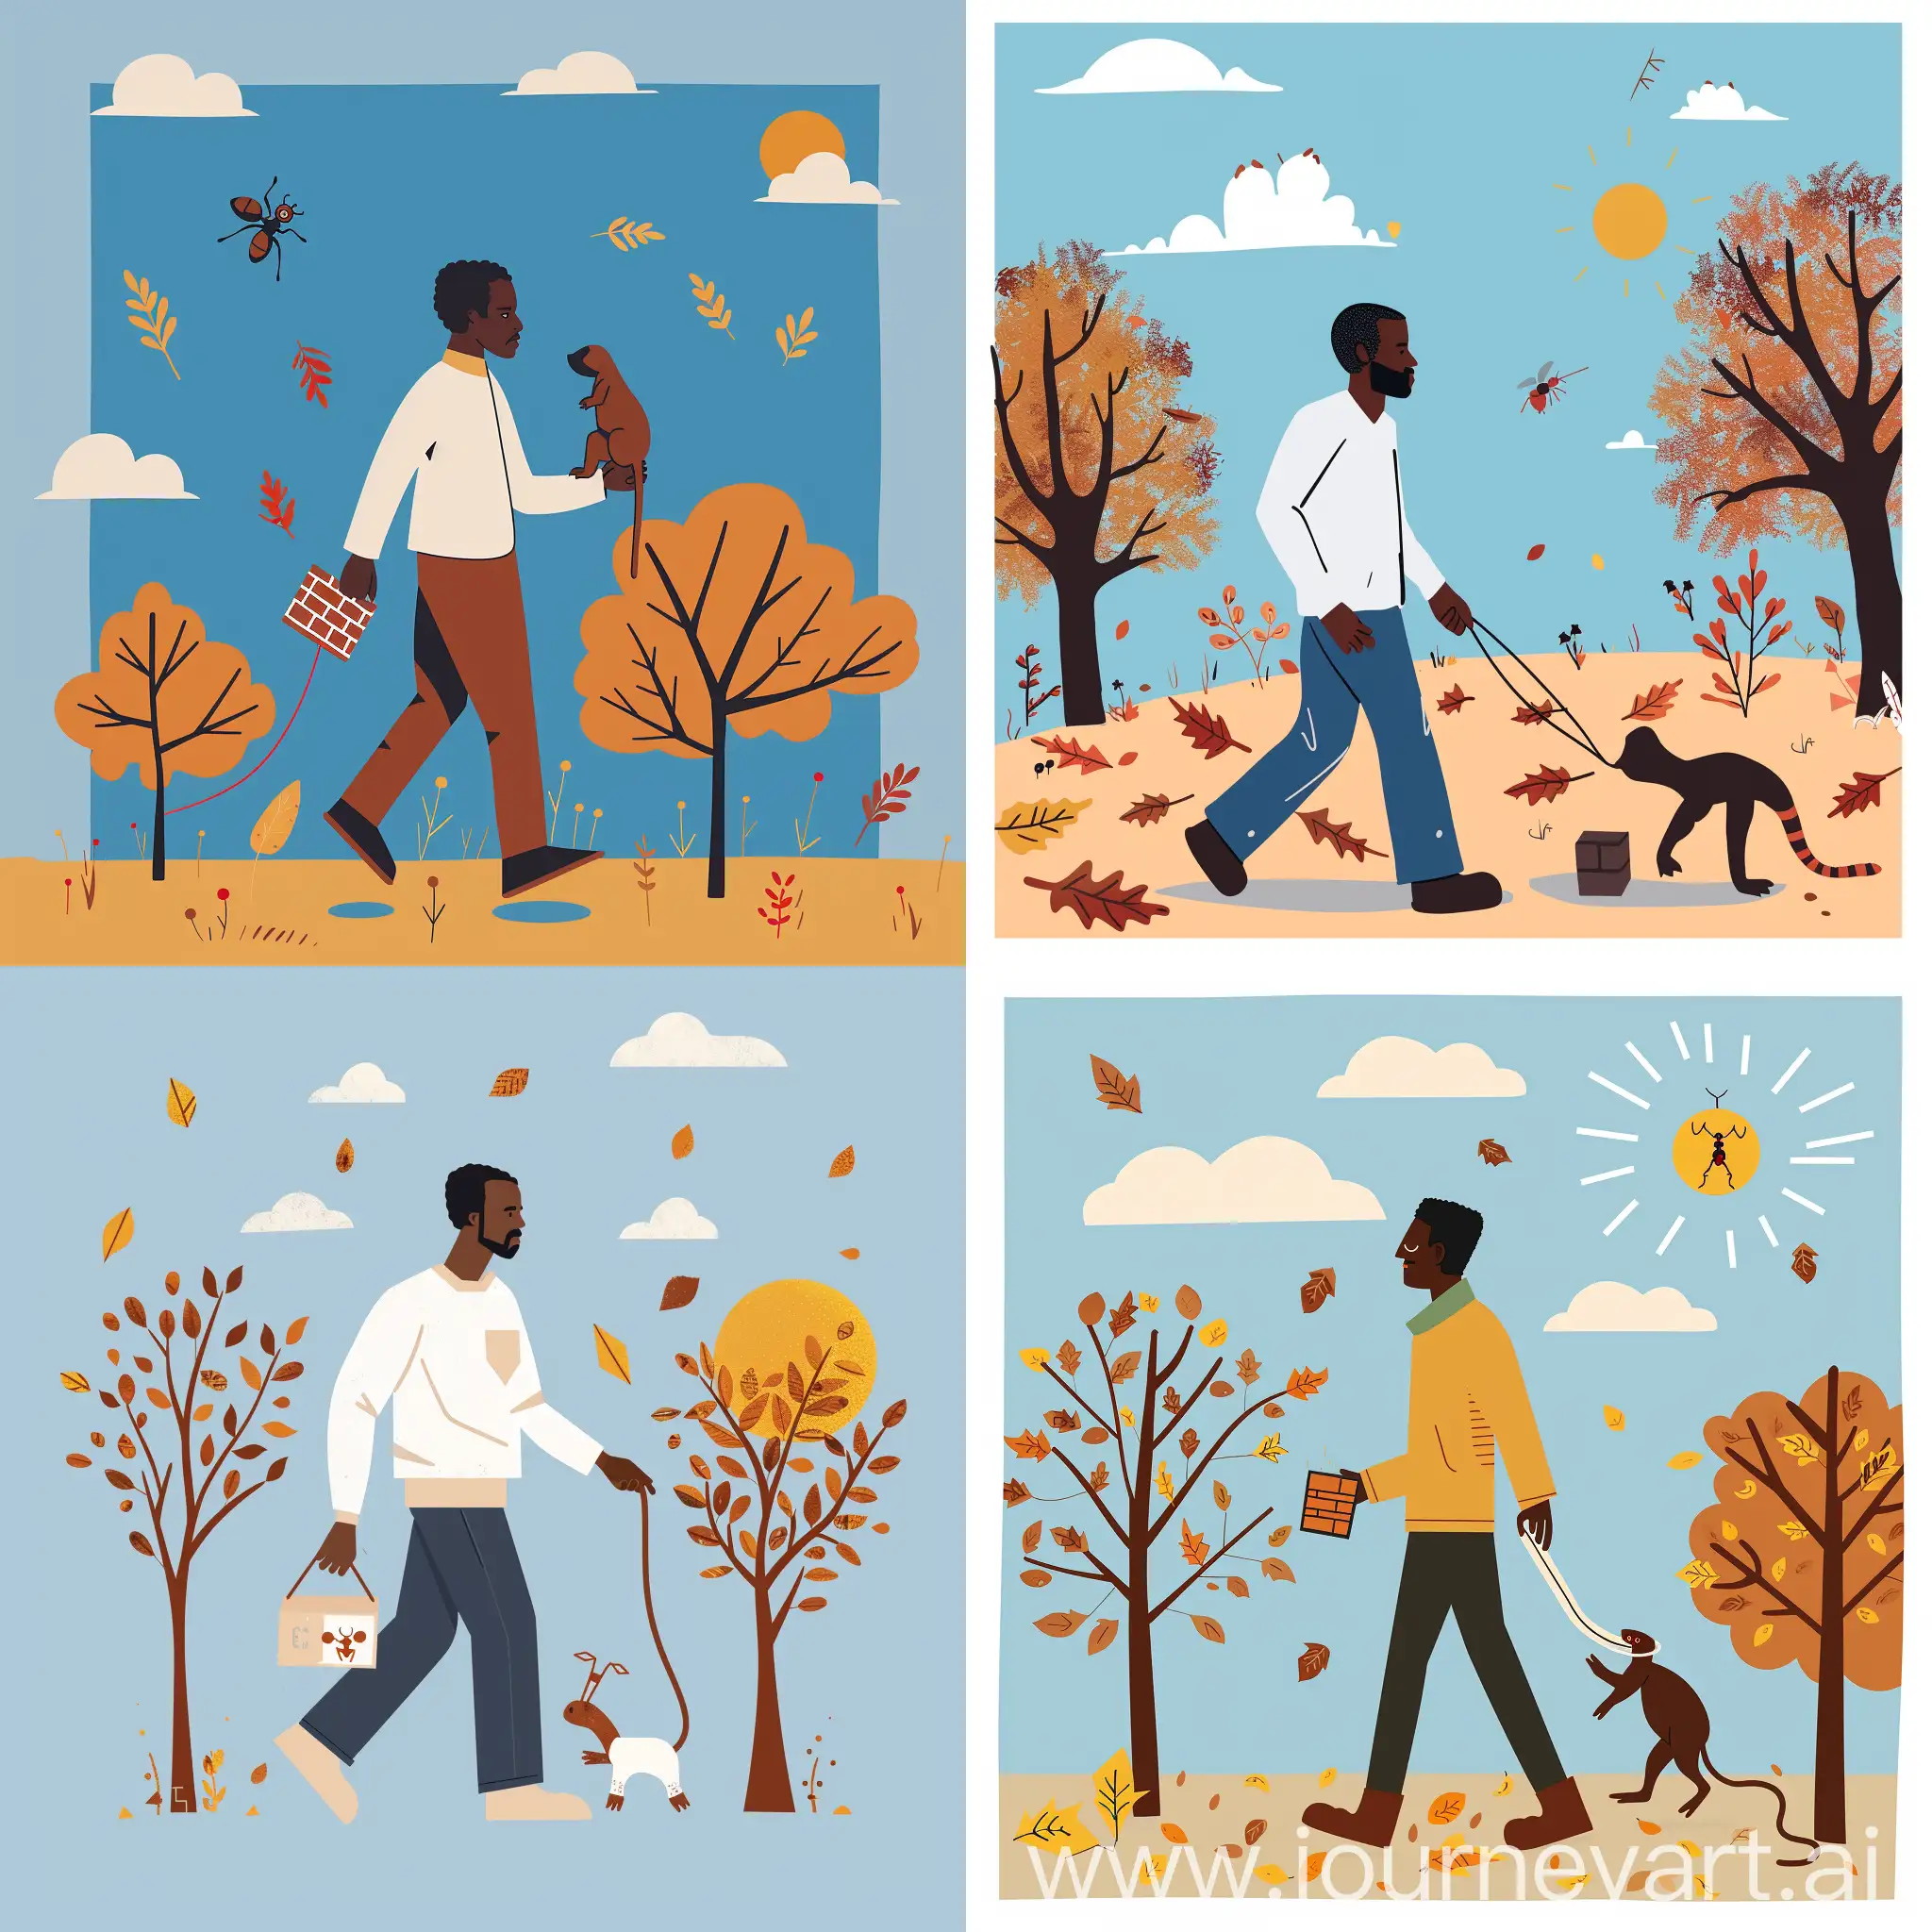 A black man walking in a park. In his right hand he has a lead, because he is walking his anteater. In his left hand he is holding a brick. It's autumn, so the leaves on the trees are brown and orange. There are clouds on the blue sky, and the sun is shaped like an ant.